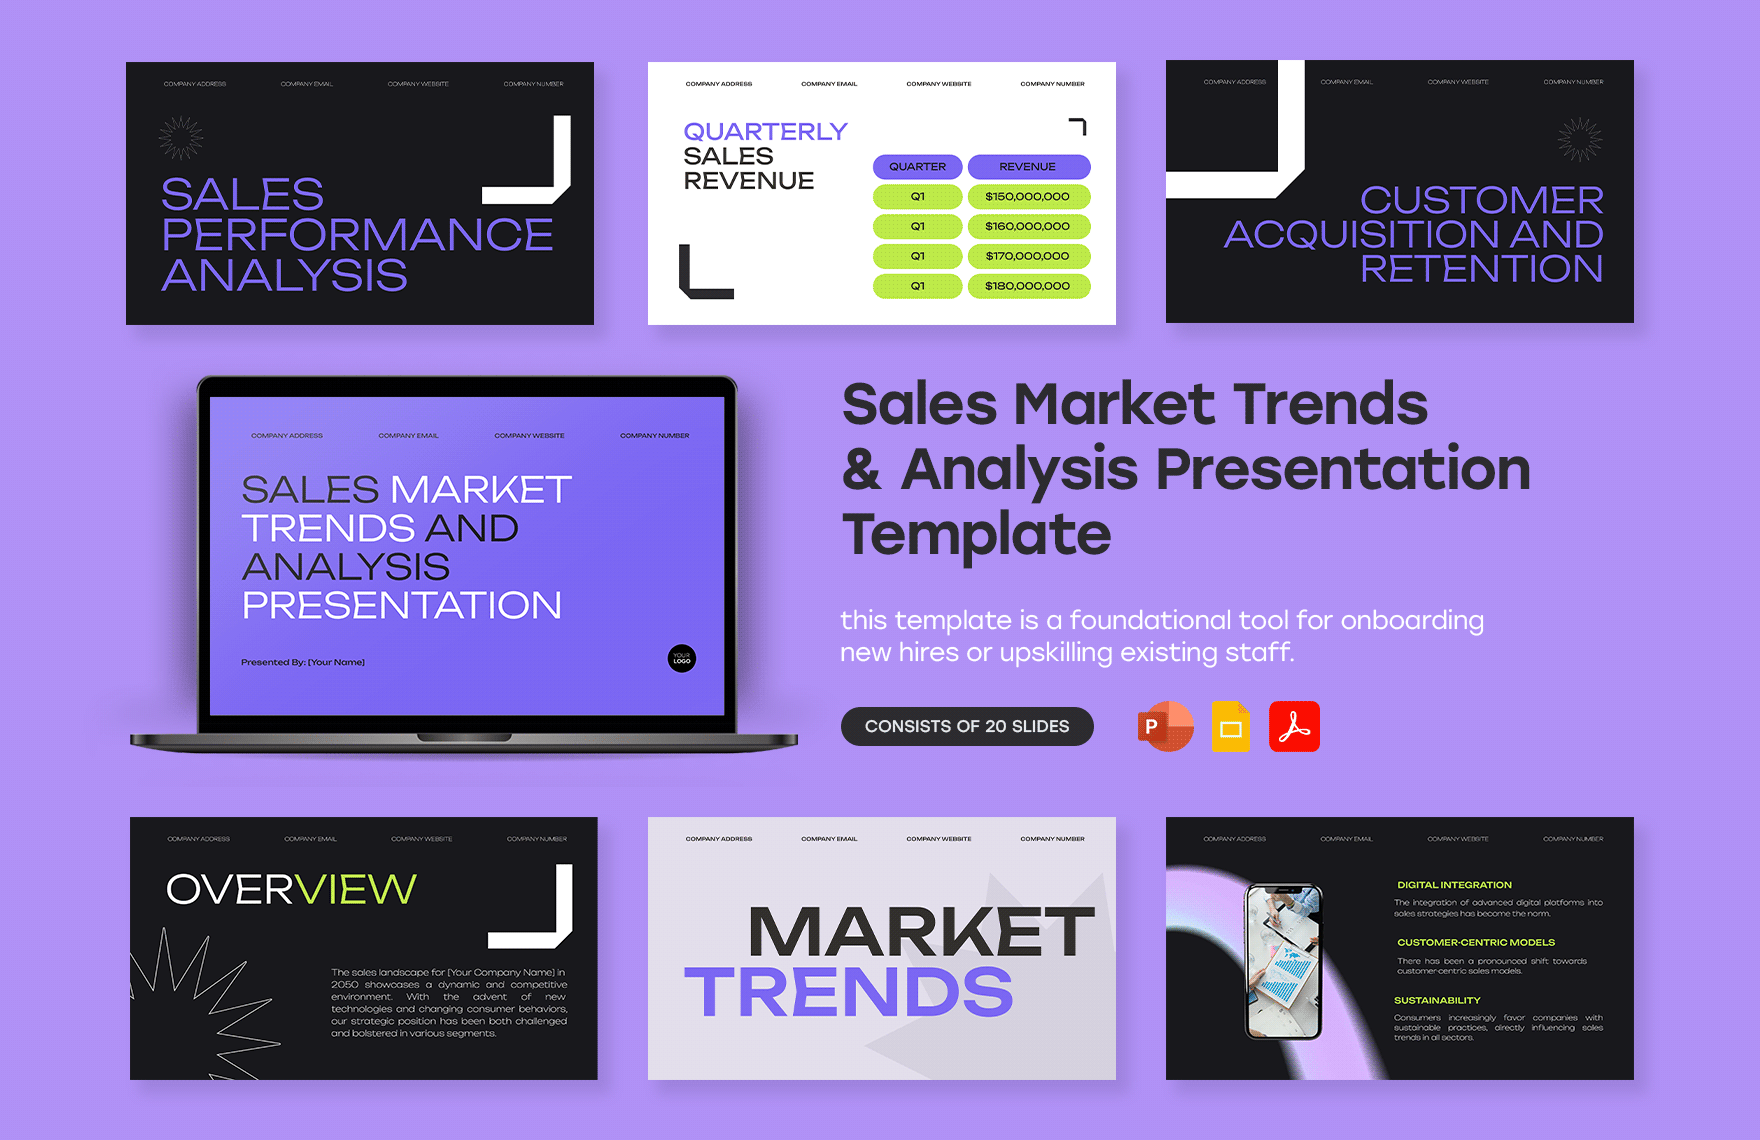 Sales Market Trends and Analysis Presentation Template